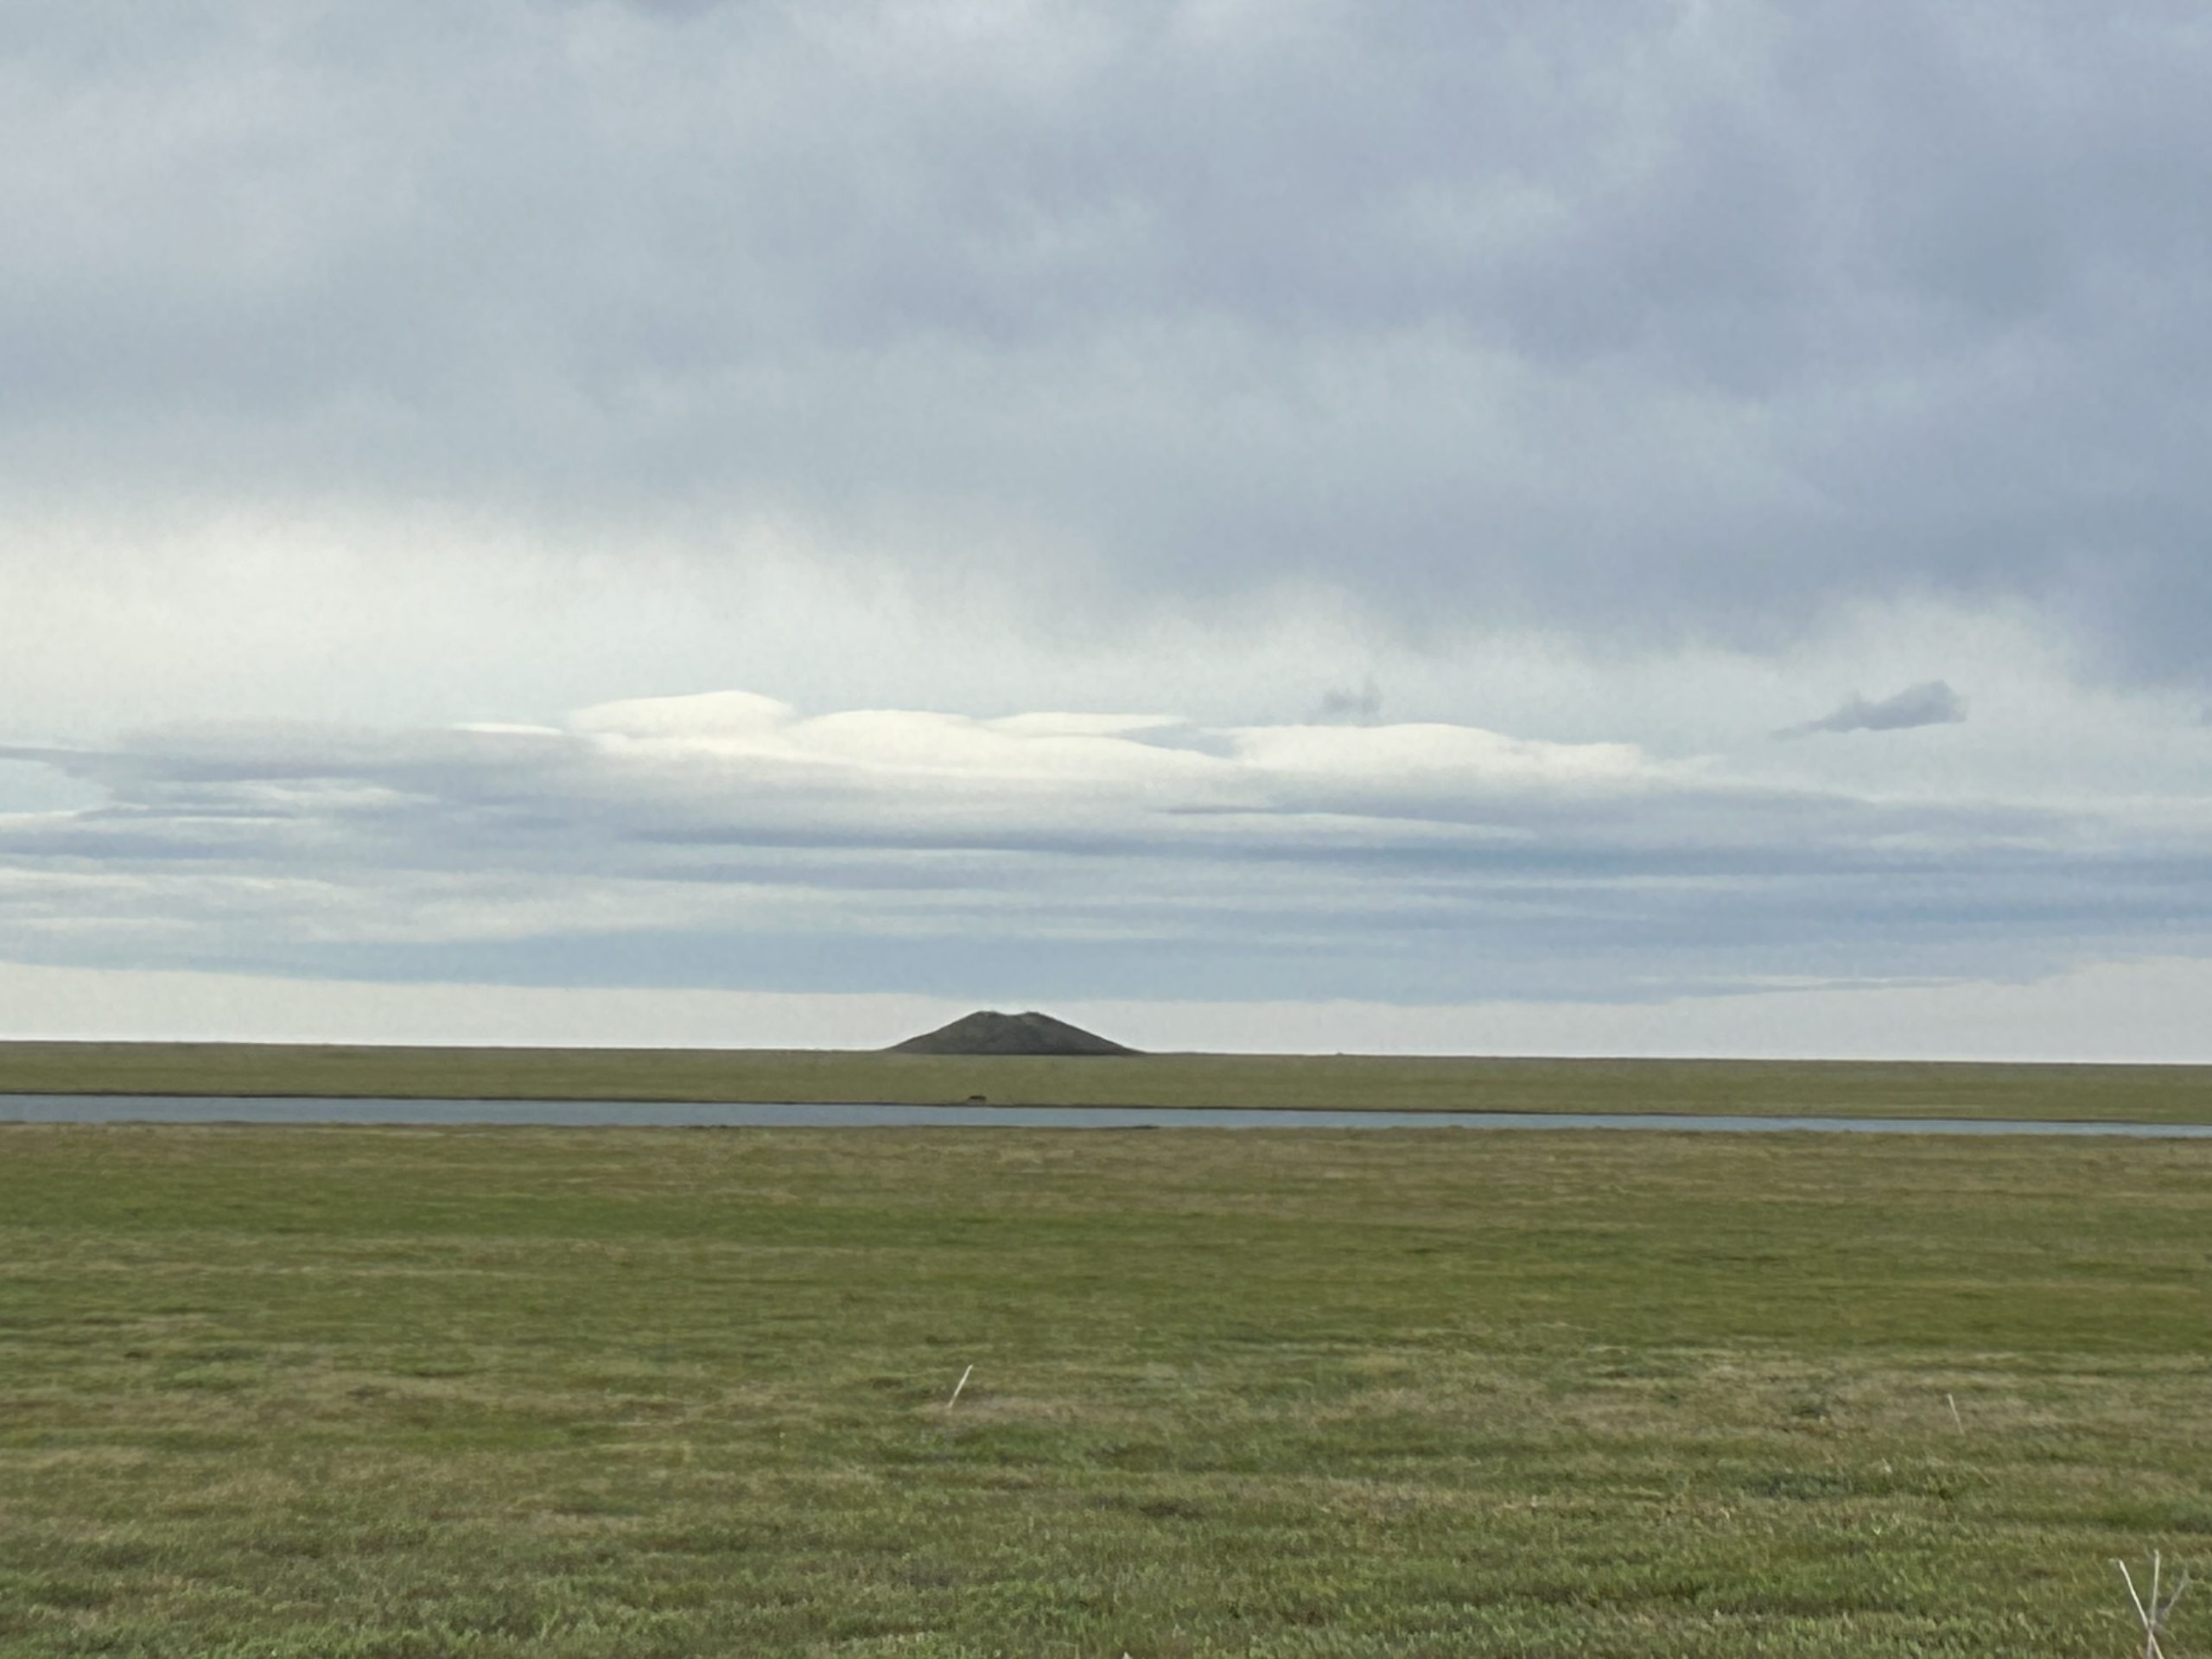 A verdant arctic tundra extends to the horizon. A small hill is apparent in the middle of the tundra -- it is a A permafrost-created pingo or “ice pimple” in the North Slope of Alaska.